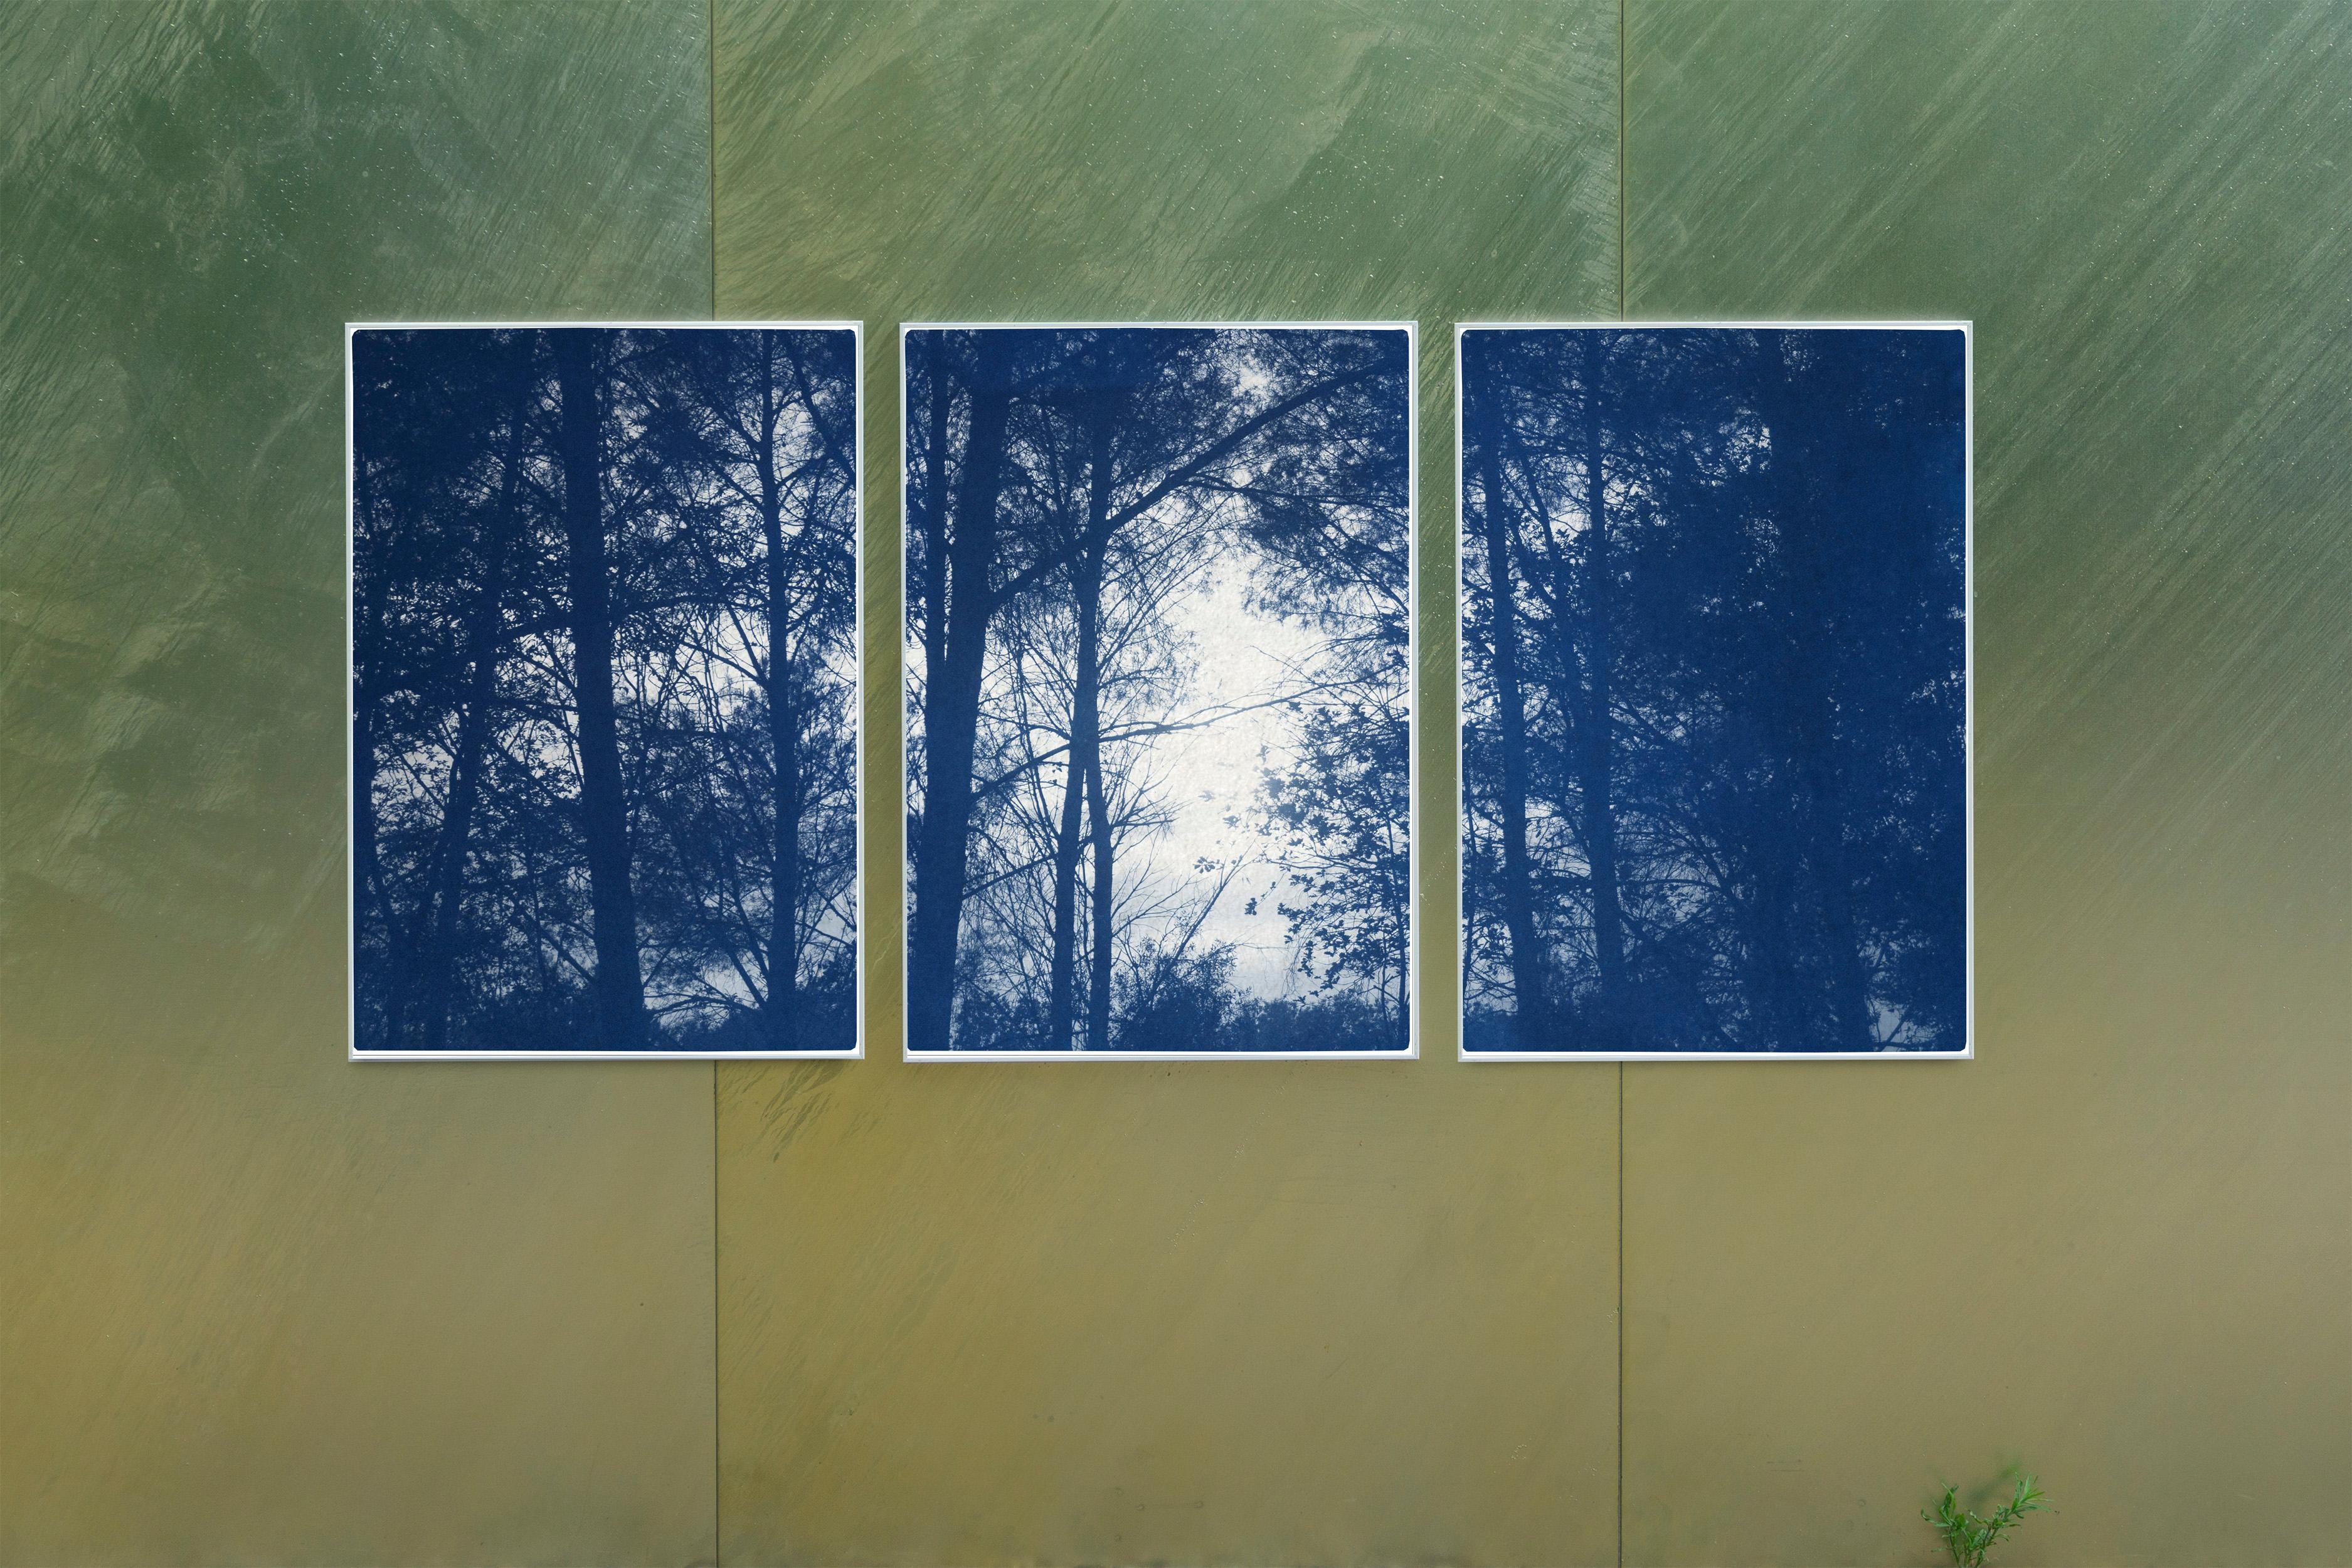 This is an exclusive handprinted limited edition cyanotype.
This beautiful triptych displays a quiet forest silhouette sunset. 

Details:
+ Title: Forest Silhouette Sunset 
+ Year: 2021
+ Edition Size: 100
+ Stamped and Certificate of Authenticity